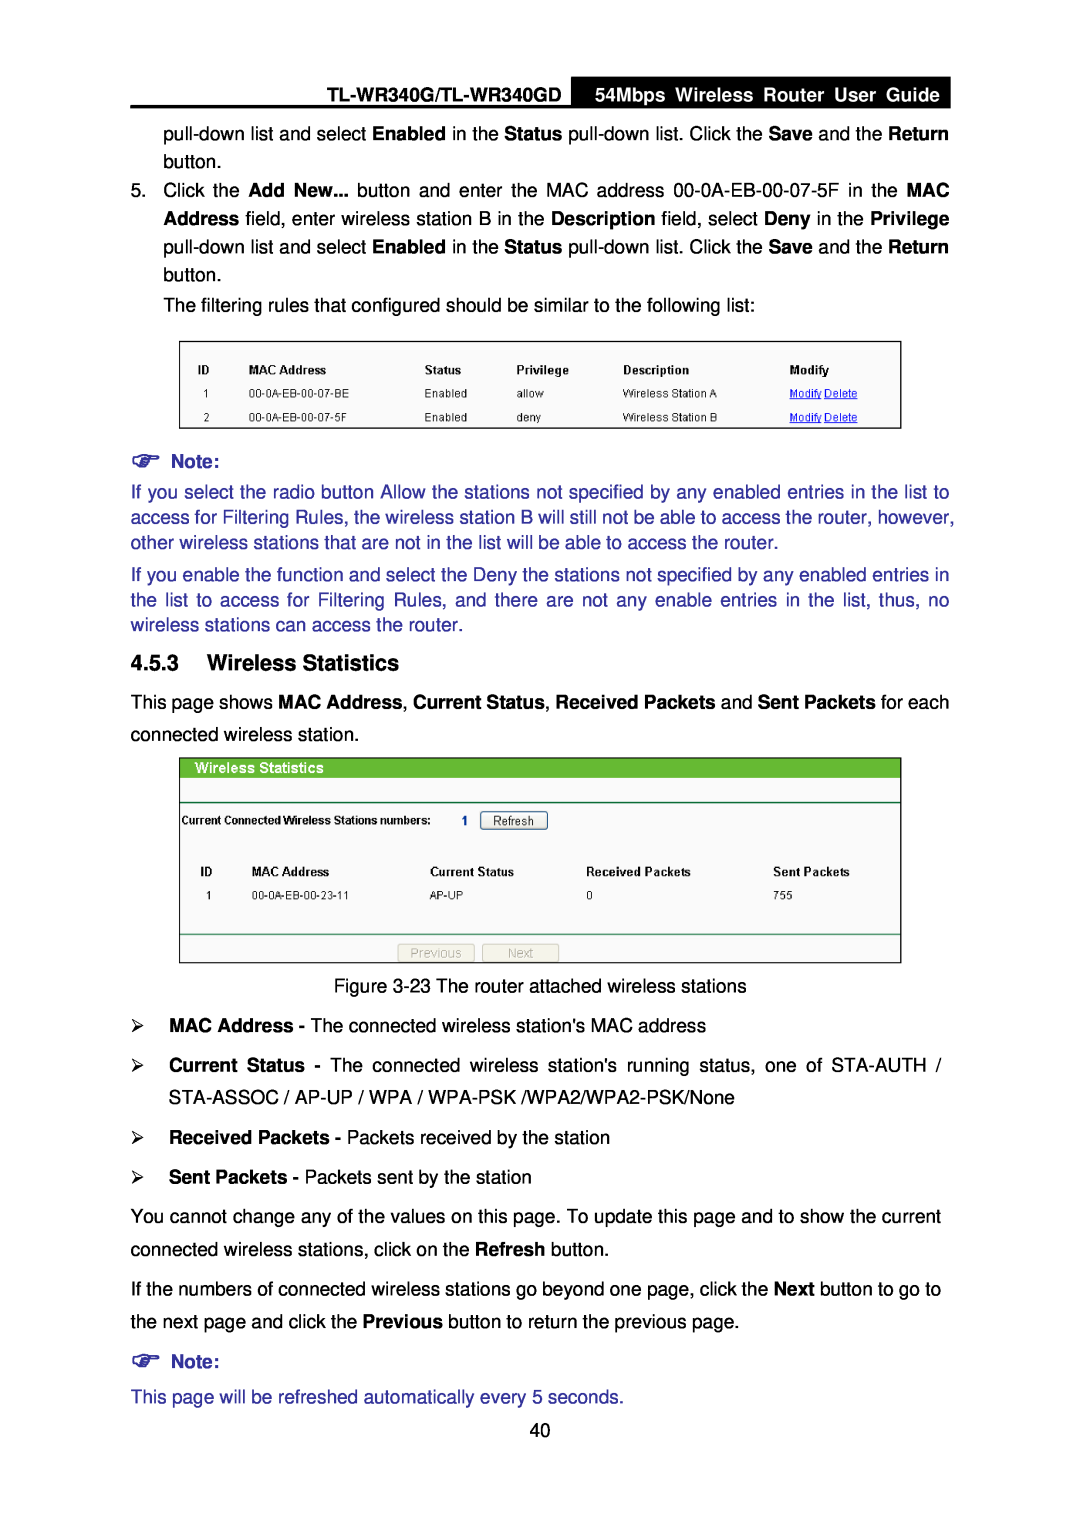 TP-Link manual Wireless Statistics, TL-WR340G/TL-WR340GD, 54Mbps Wireless Router User Guide 